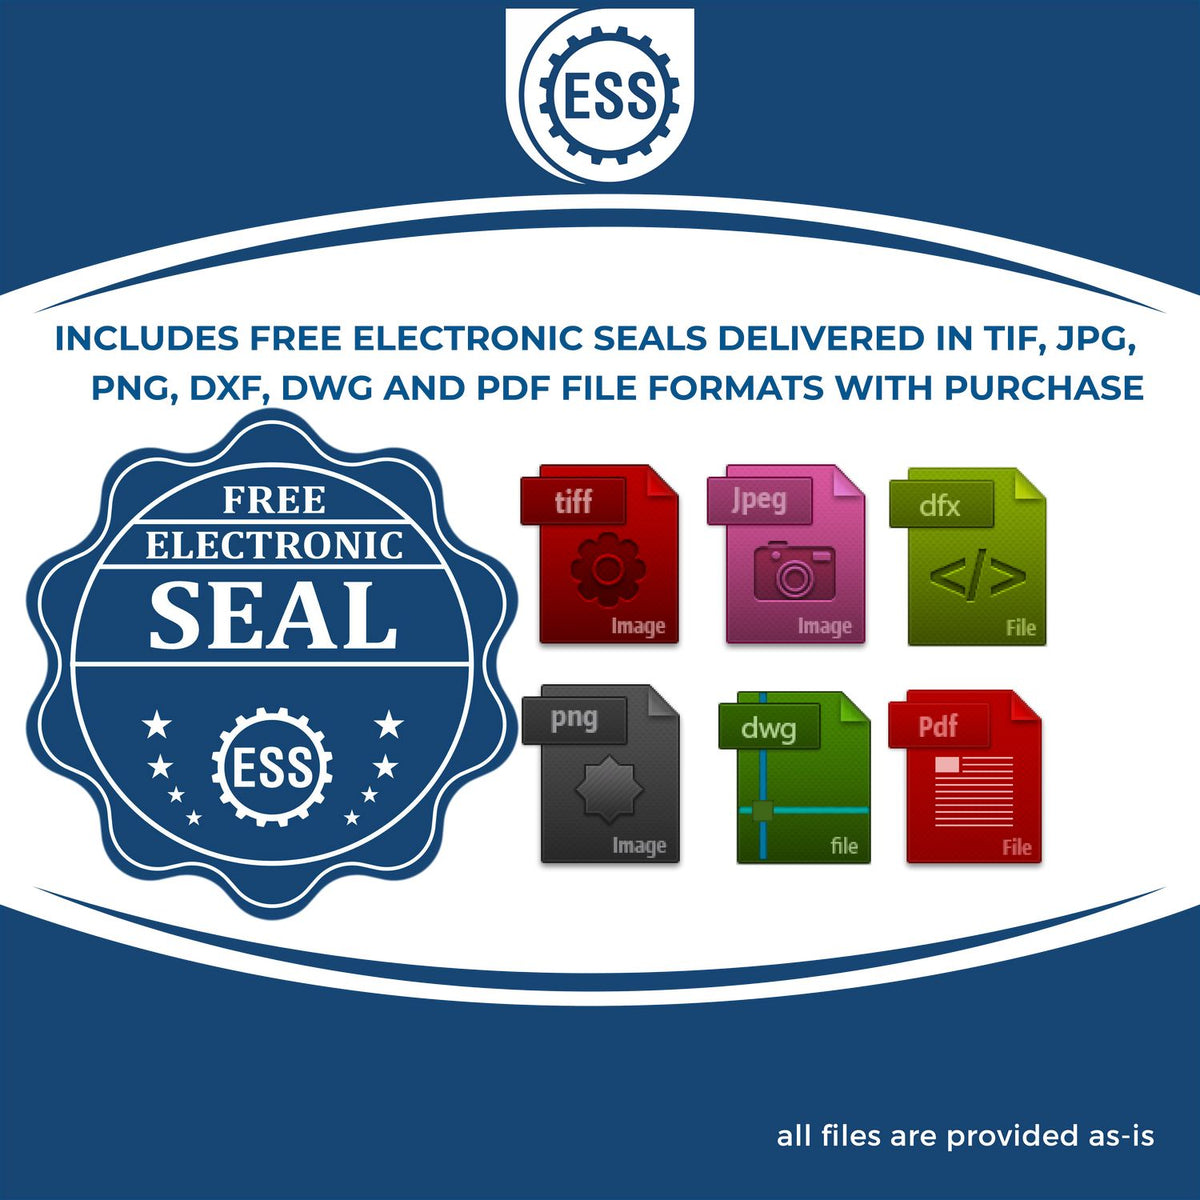 An infographic for the free electronic seal for the Premium MaxLight Pre-Inked North Carolina Engineering Stamp illustrating the different file type icons such as DXF, DWG, TIF, JPG and PNG.